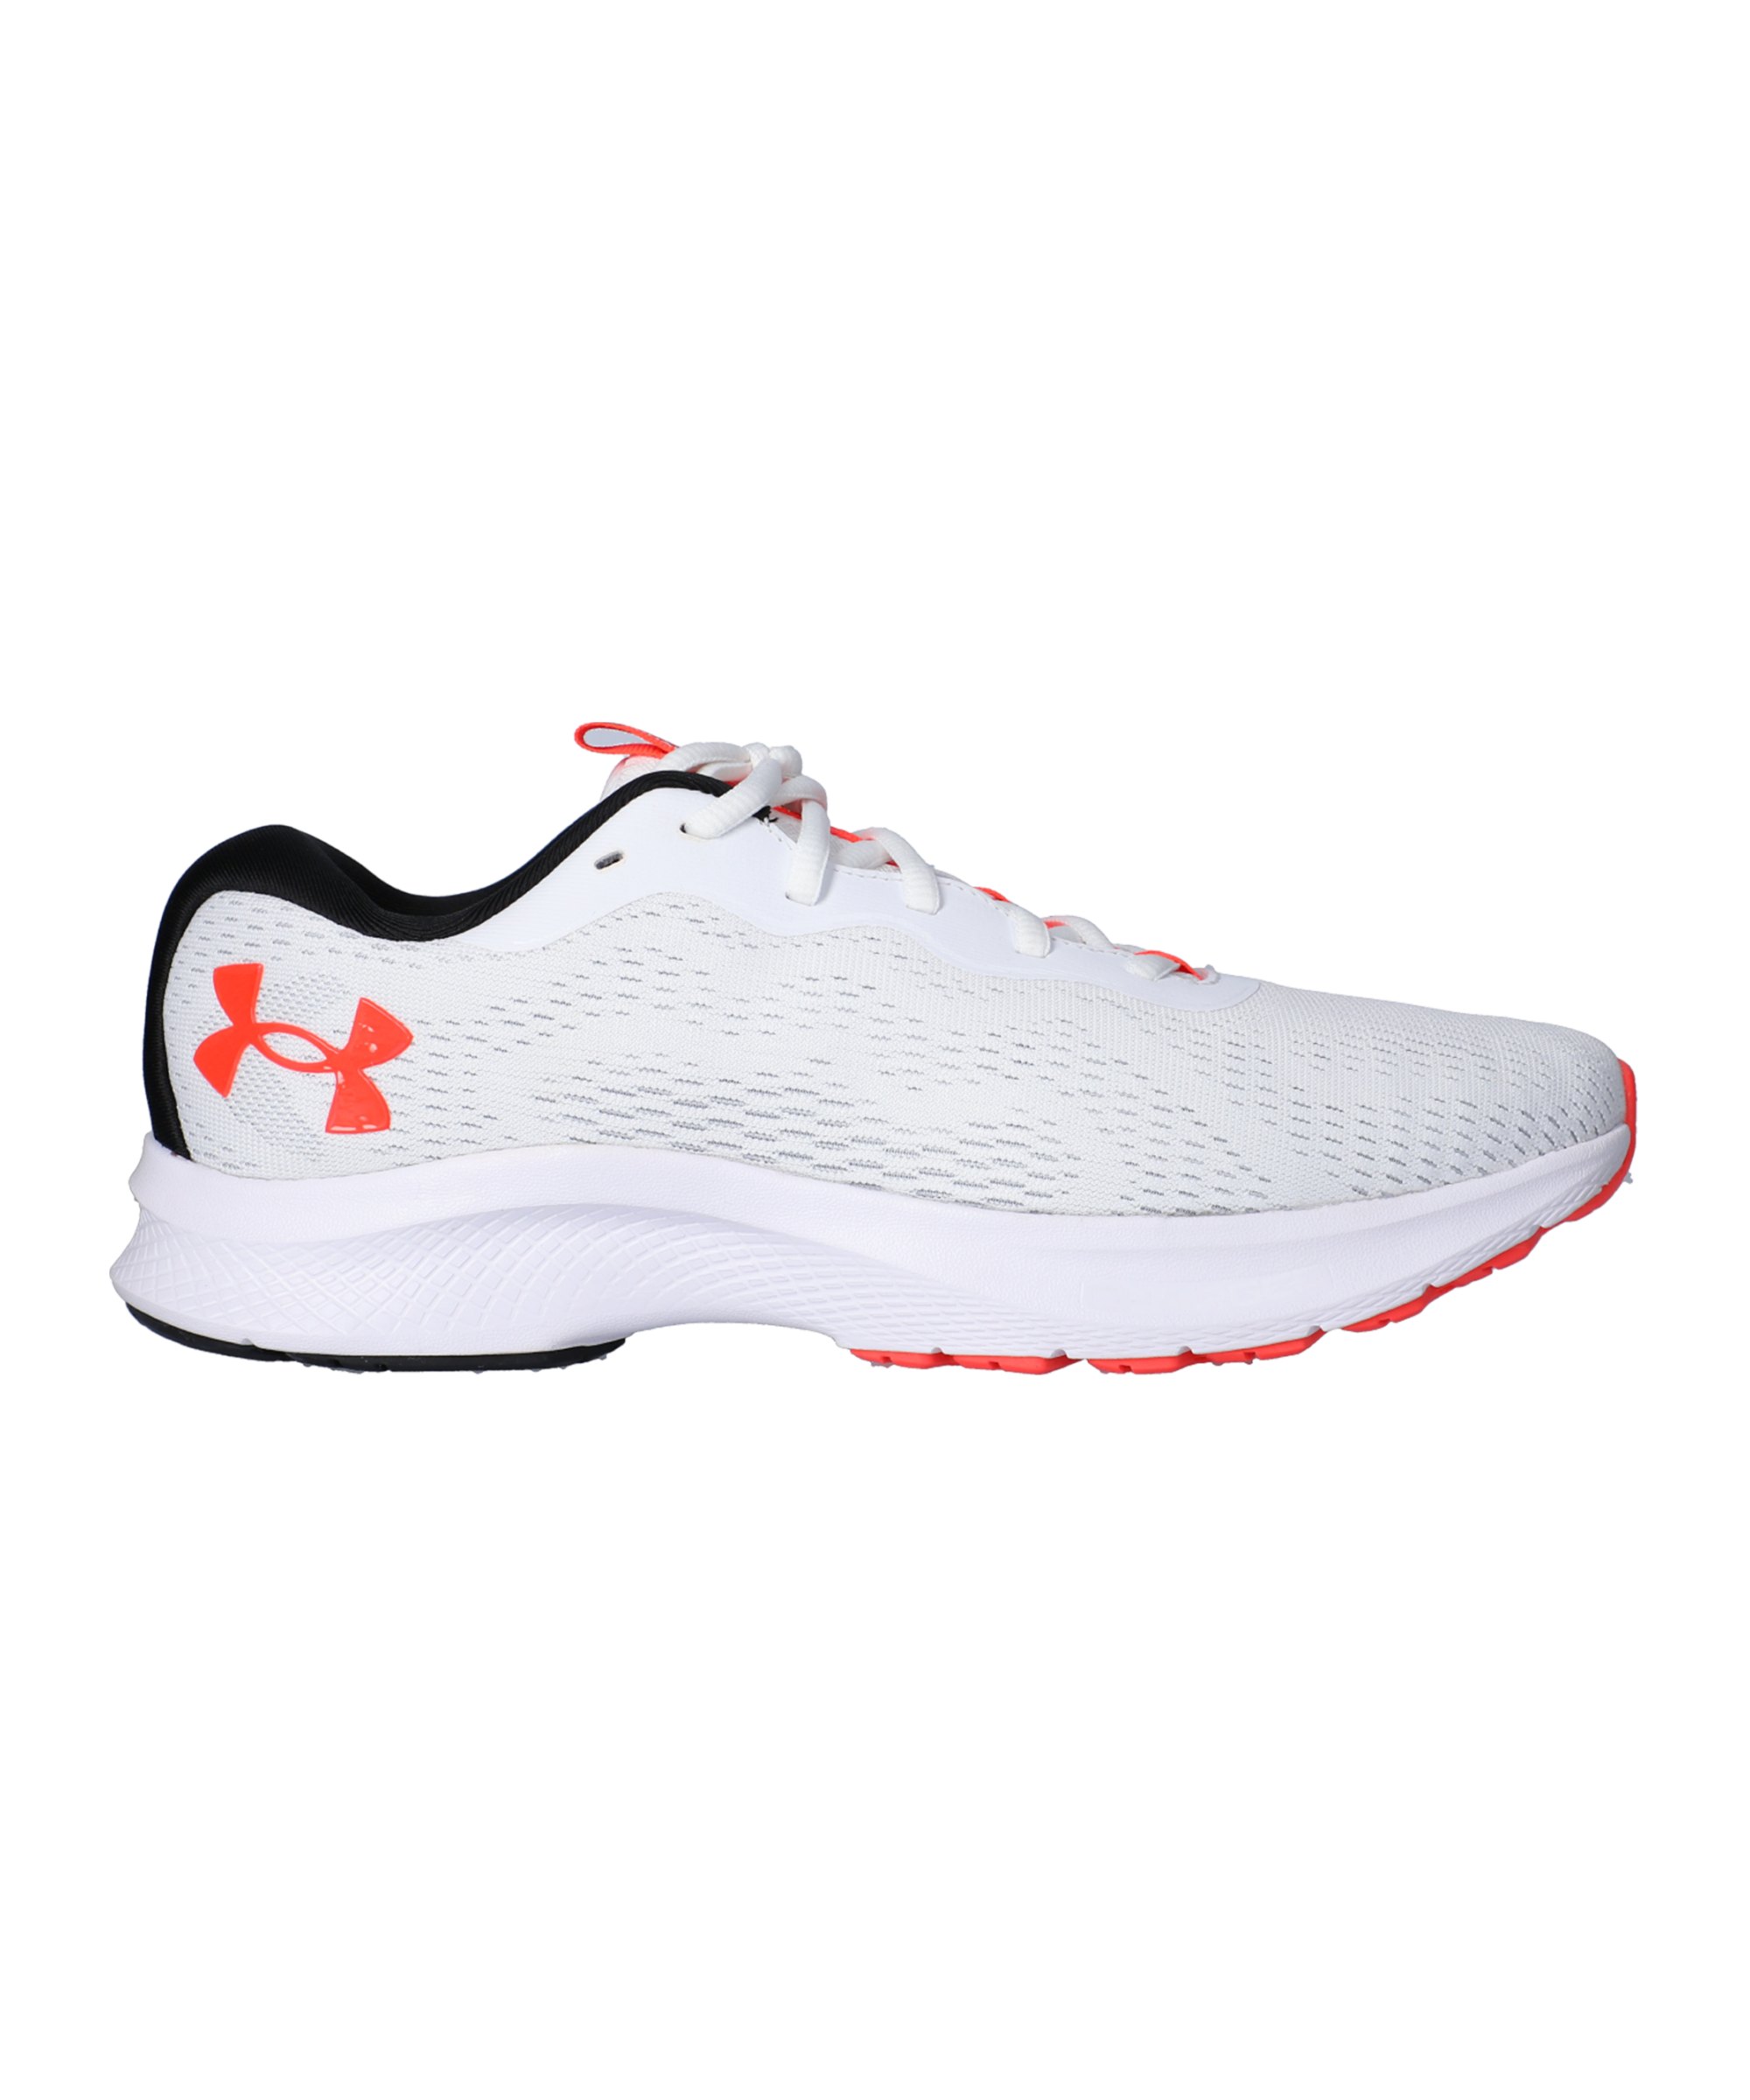 Under Armour Charged Bandit 7 Running Weiss F100 - weiss